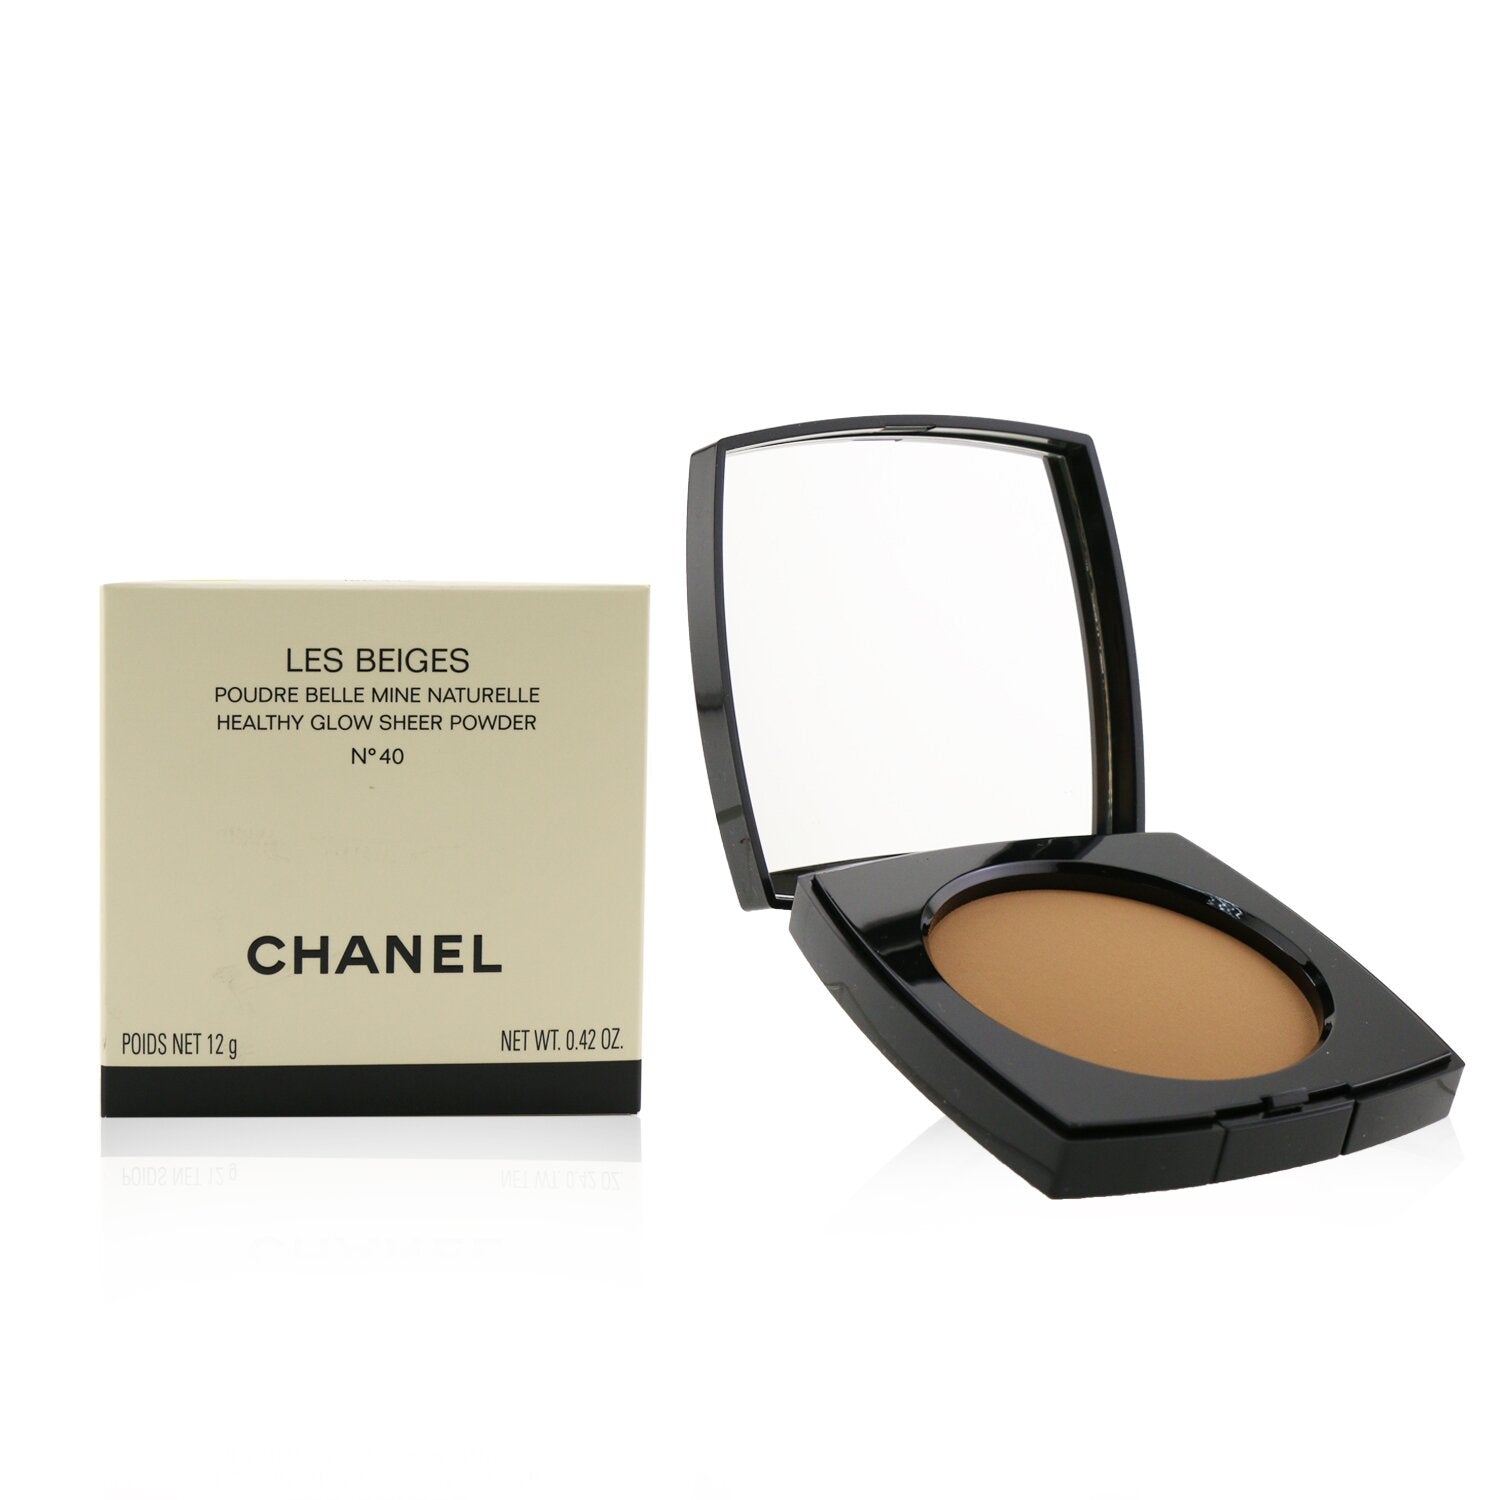 Les Beiges Healthy Glow Sheer Powder - 40 for Sale | Chanel, Make Up, Buy Now – Author